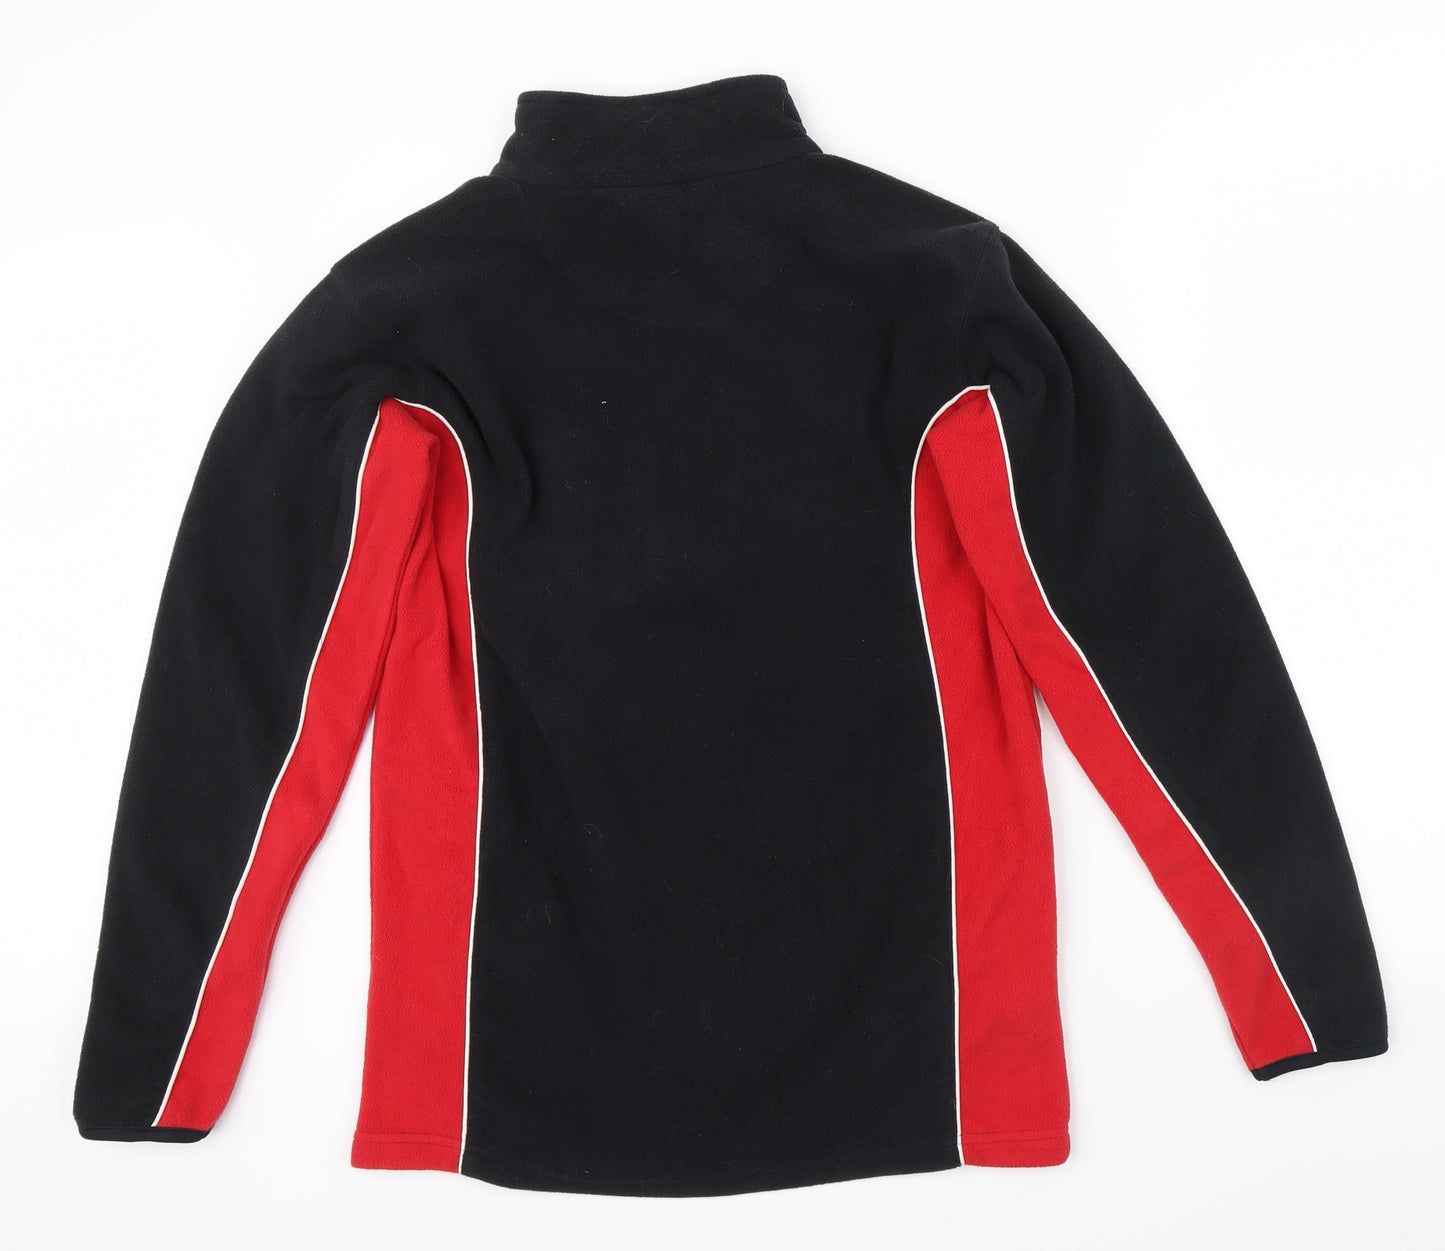 Tombo Mens Black   Pullover Jumper Size M  - RED SIDE PANALS